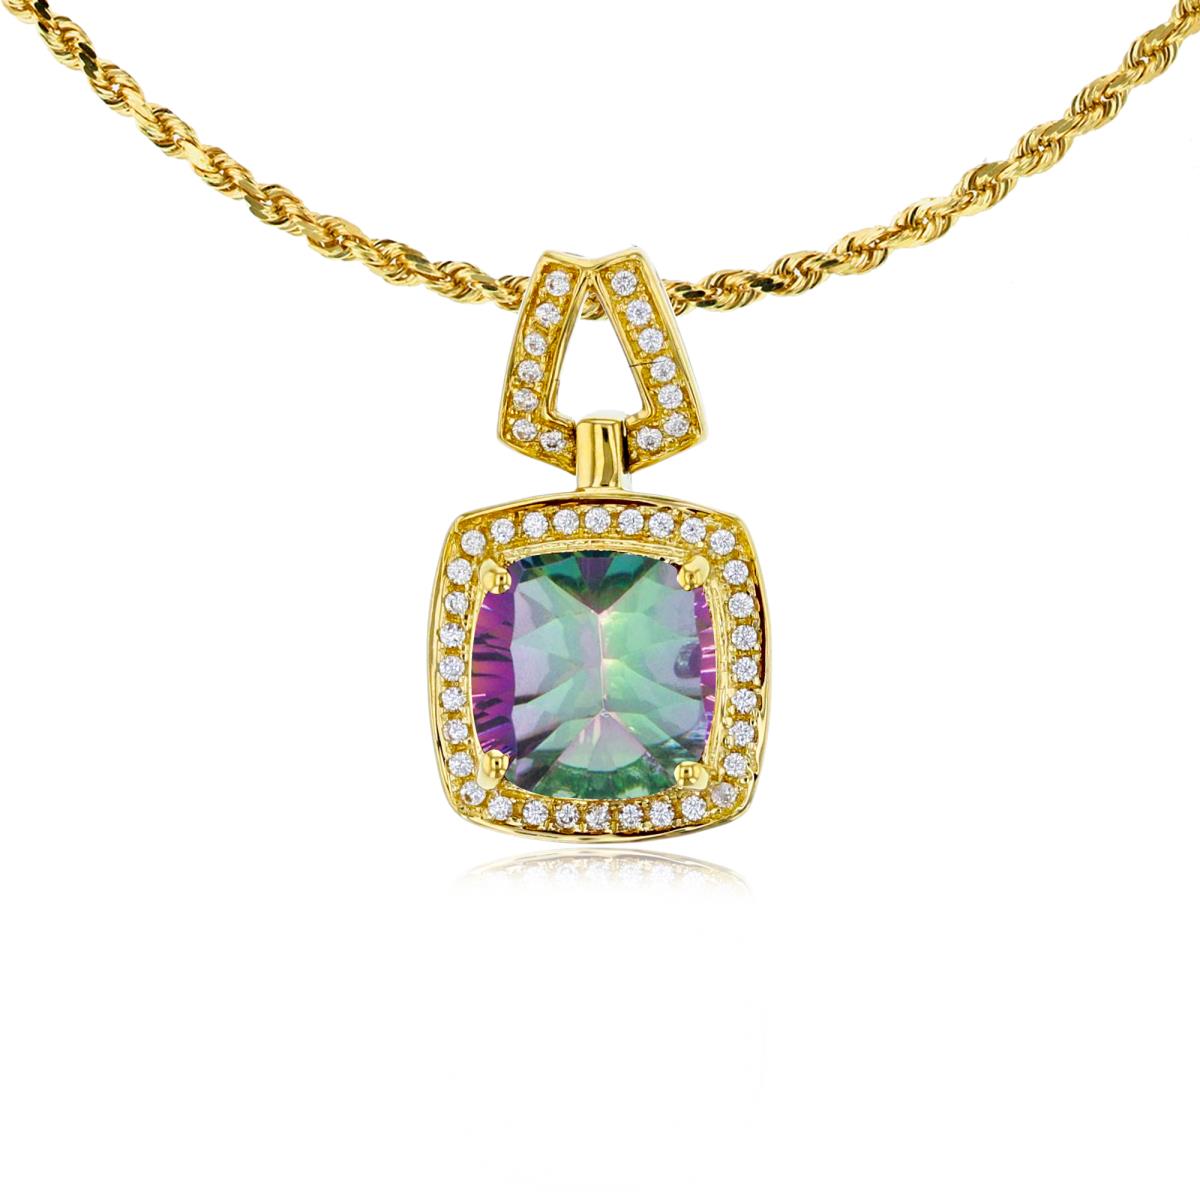 10K Yellow Gold 7mm Cushion Mystic Green Topaz & 0.10 CTTW Diamond Halo 18" Rope Chain Necklace